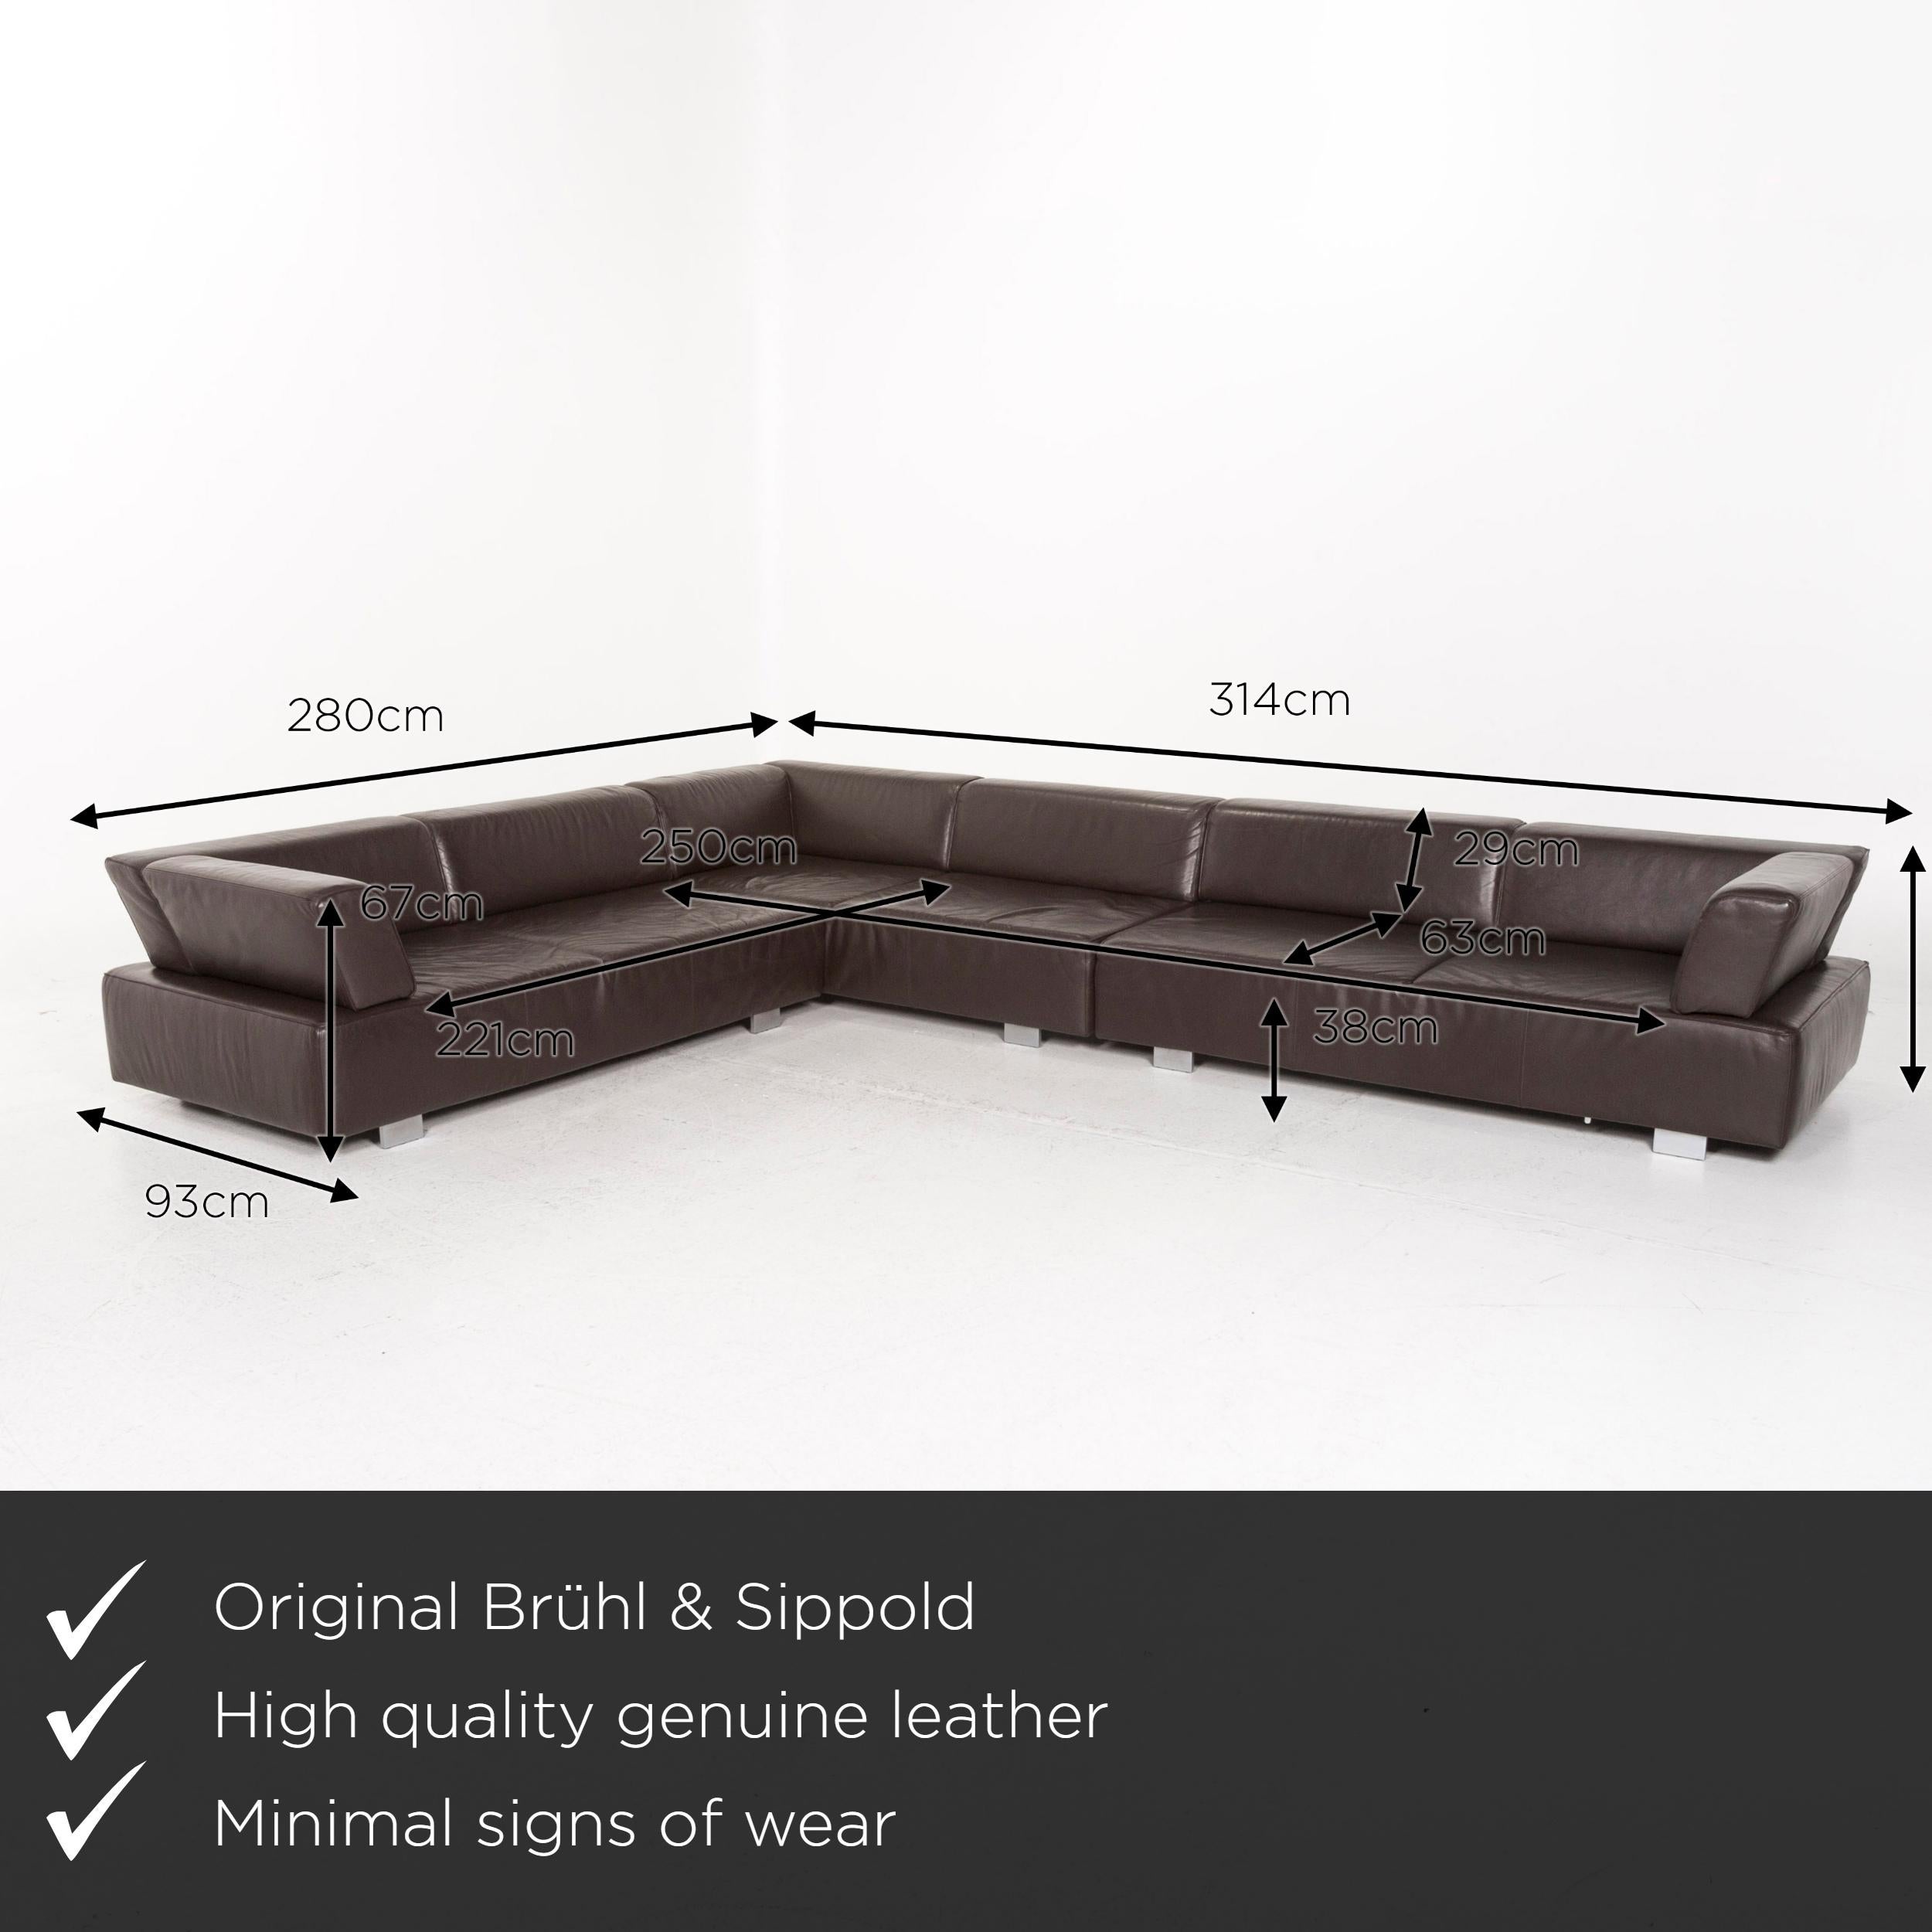 We present to you a Brühl & Sippold leather corner sofa set brown dark brown 1 corner sofa 1 stool.

 

 Product measurements in centimeters:
 

Depth 93
Width 280
Height 67
Seat height 38
Rest height 67
Seat depth 63
Seat width